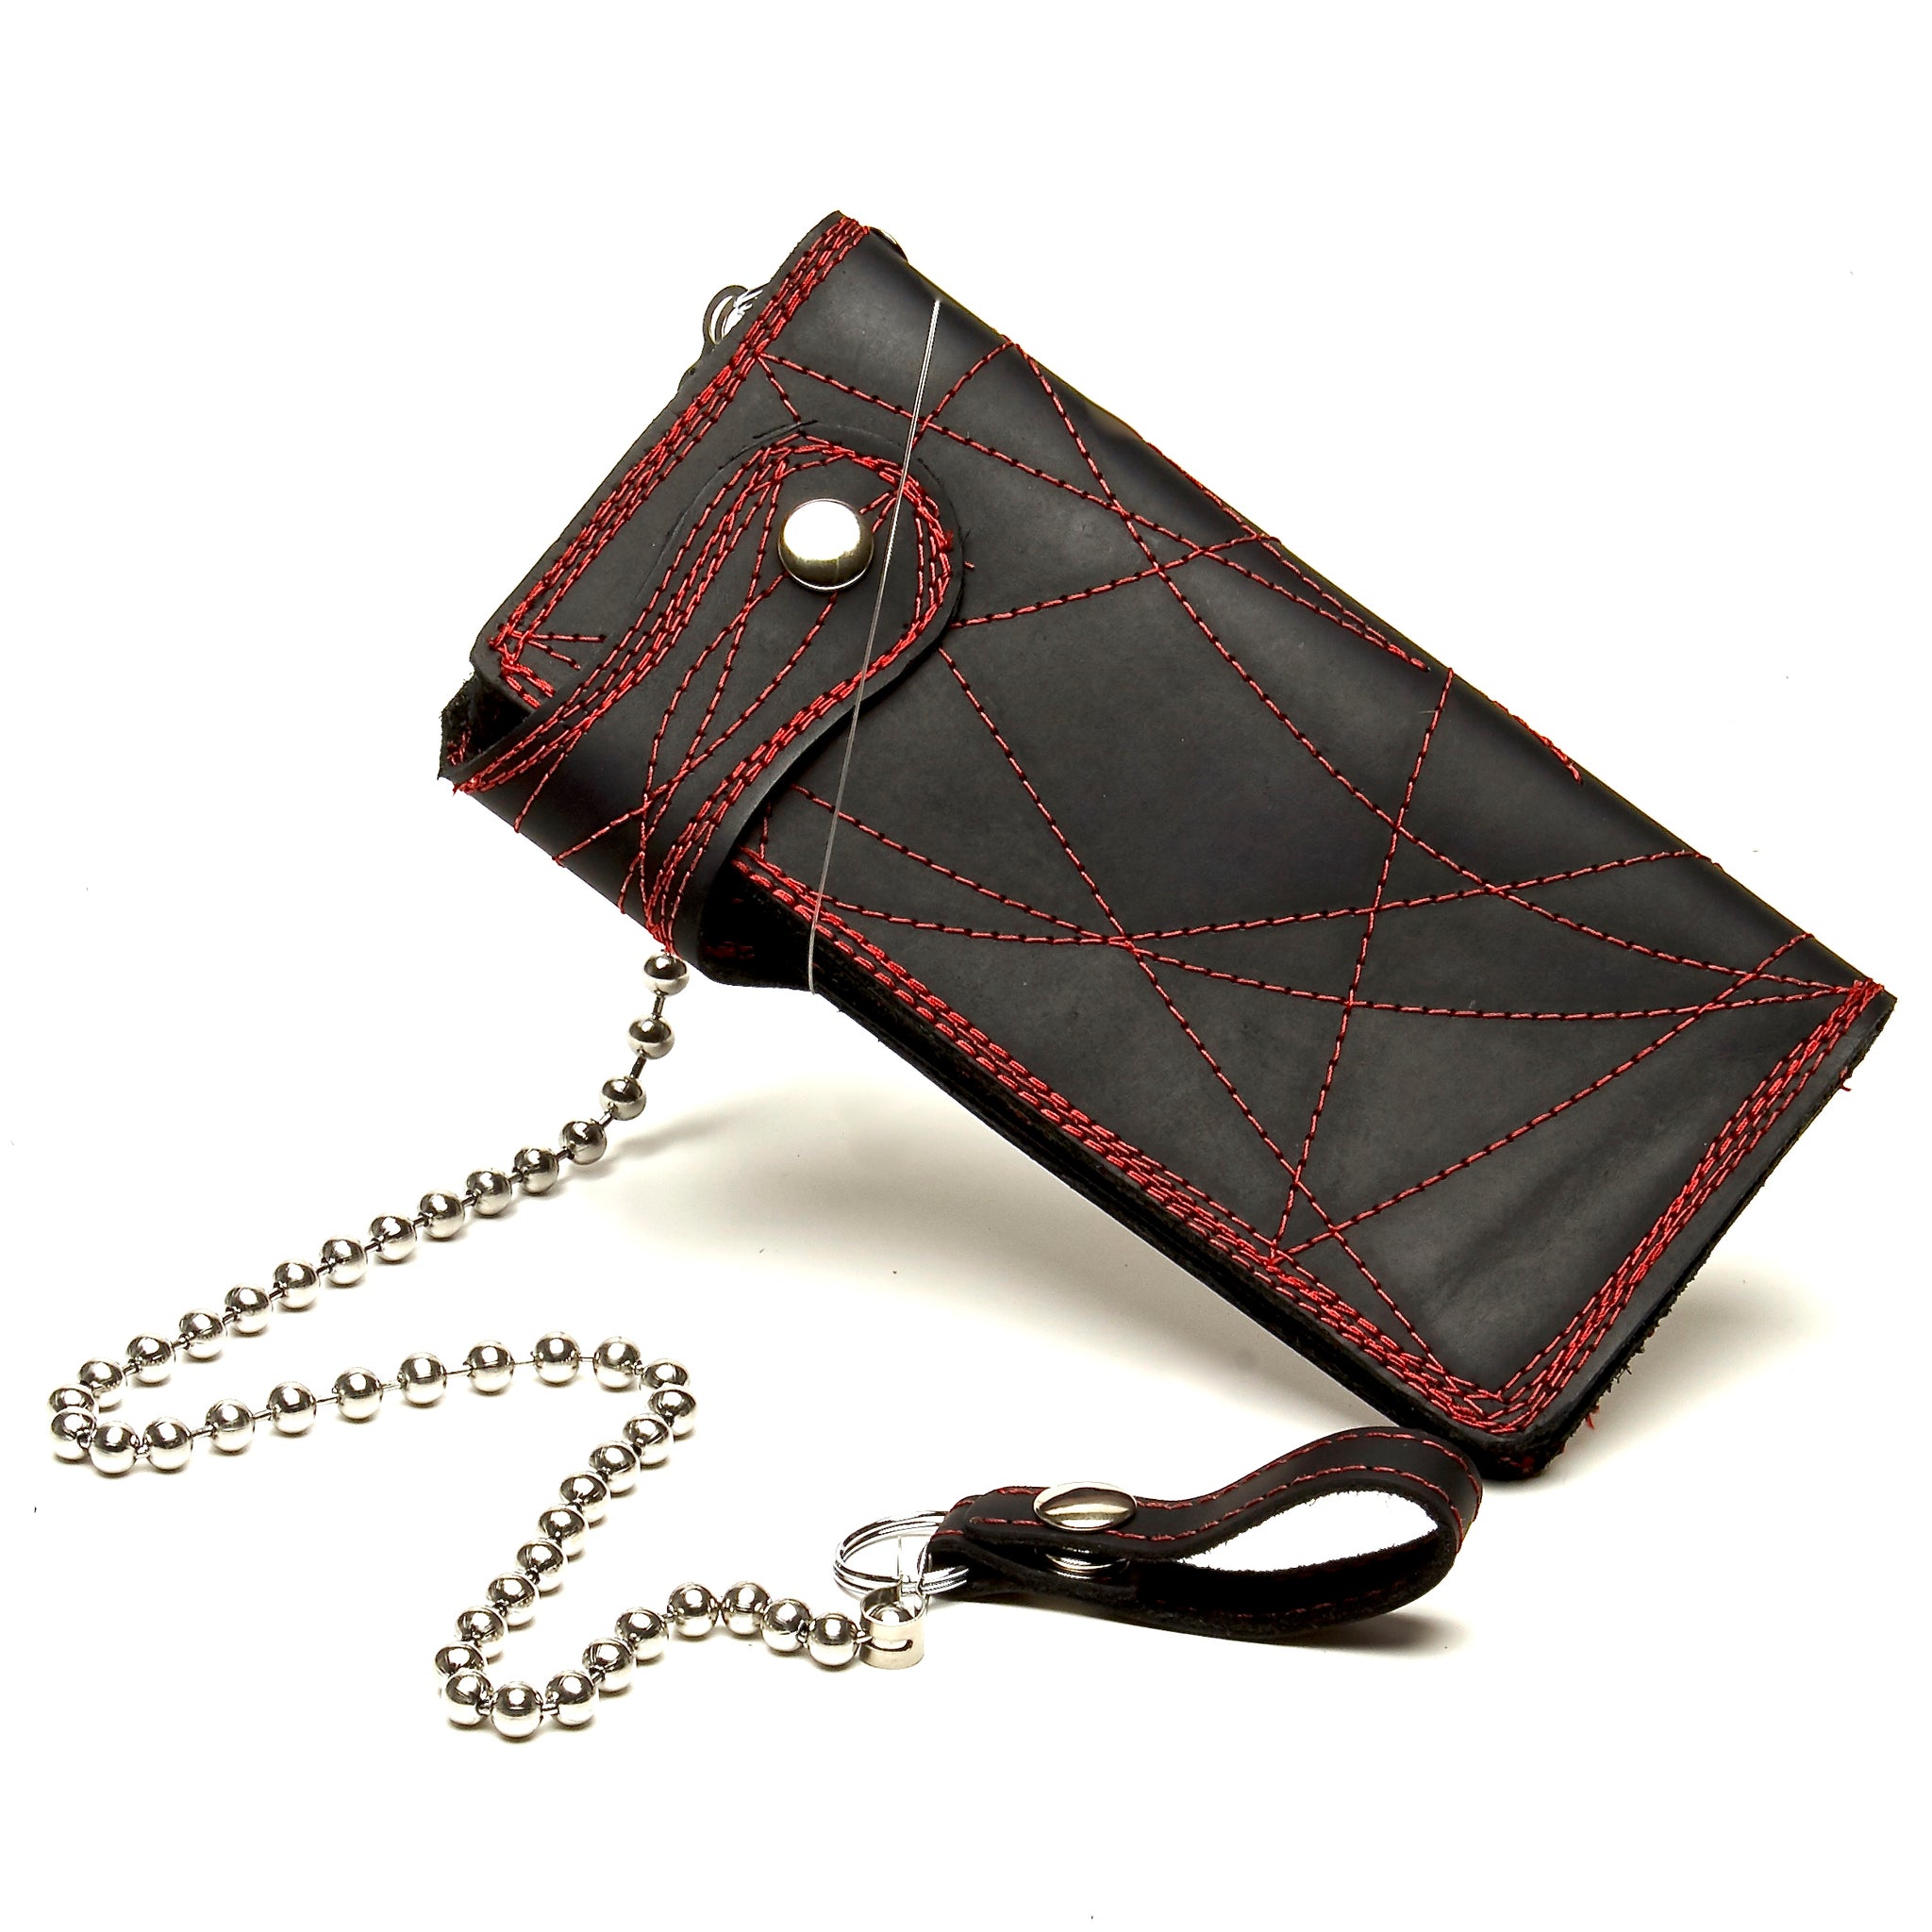 BLACK STONE OILED LEATHER COWHIDE BIKER WALLET WITH RED CONTRASTING STITCHING THROUGHOUT AND MATCHING CHAIN. by nyet jewelry.